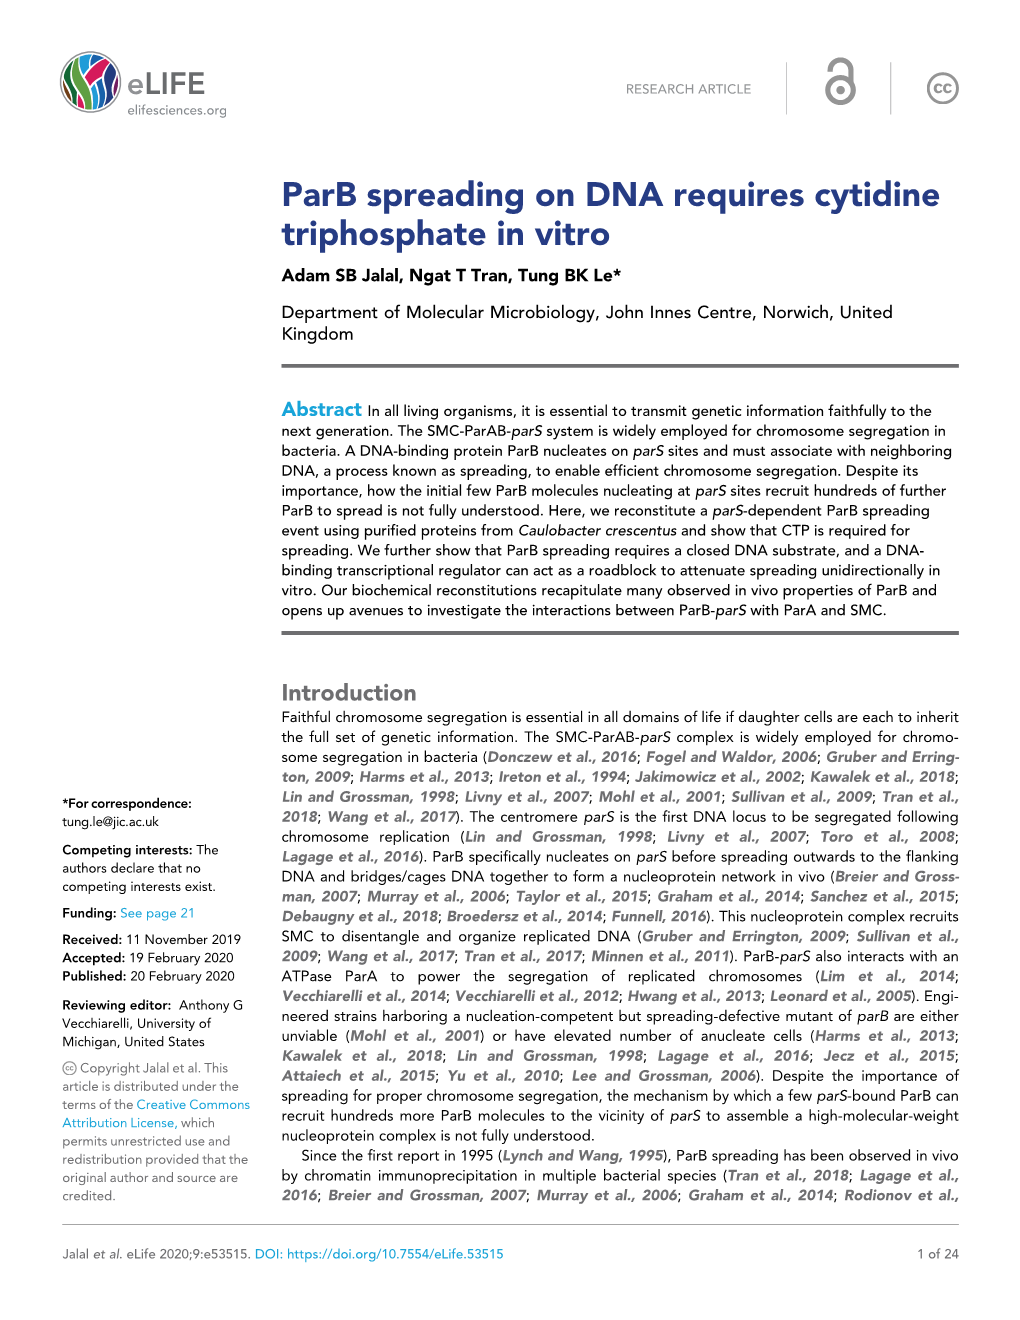 Parb Spreading on DNA Requires Cytidine Triphosphate in Vitro Adam SB Jalal, Ngat T Tran, Tung BK Le*